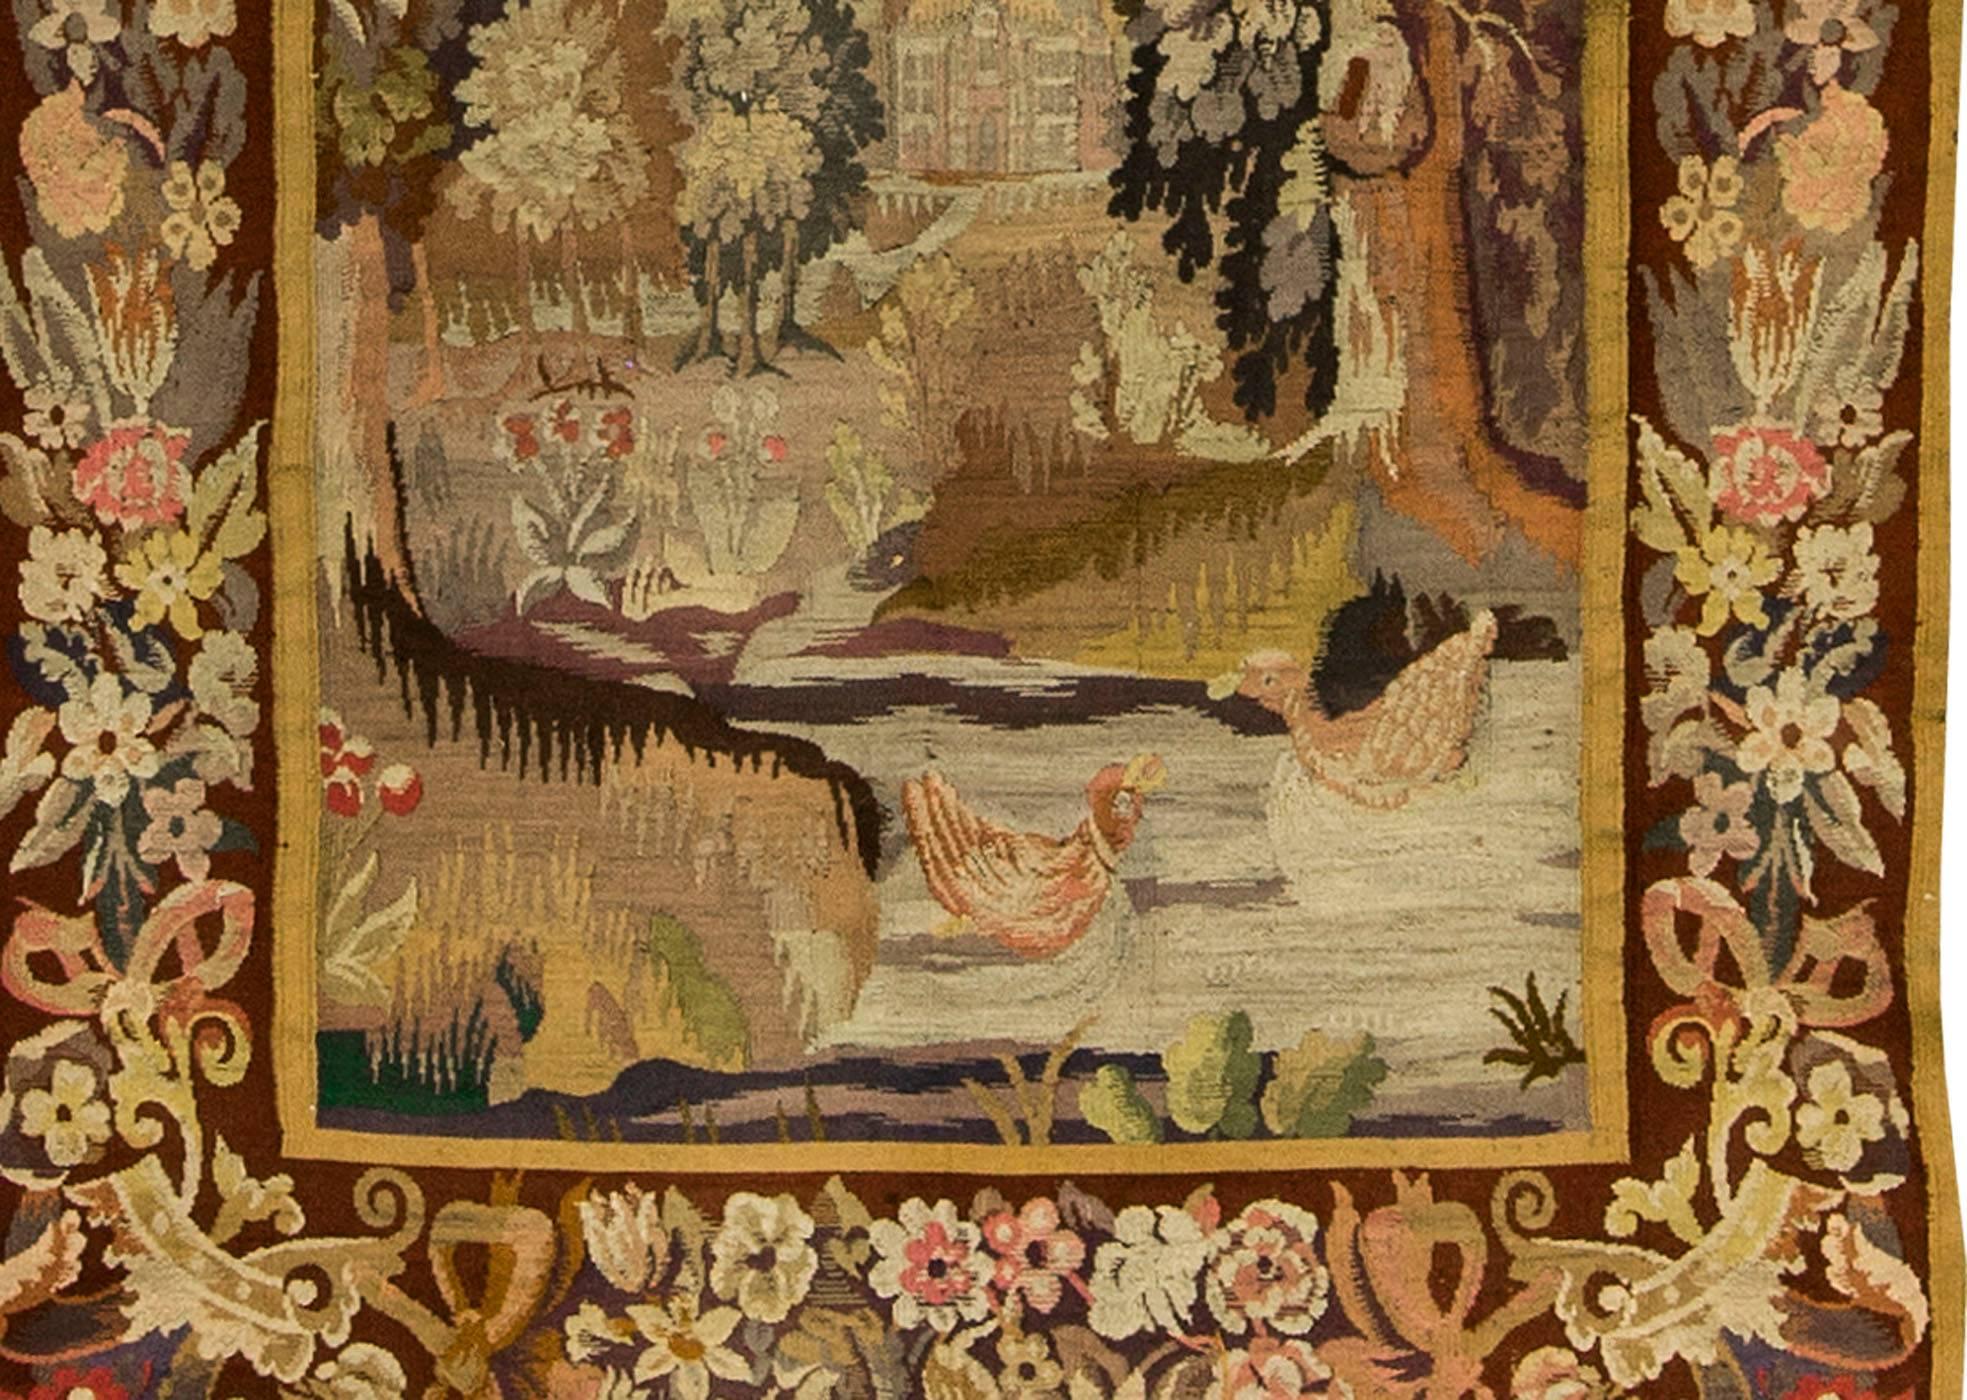 19th century French tapestry. A countryside scene with a stream running down to the large country houses in the background. A pair of birds are playing in the water with overhanging trees dense with foliage.